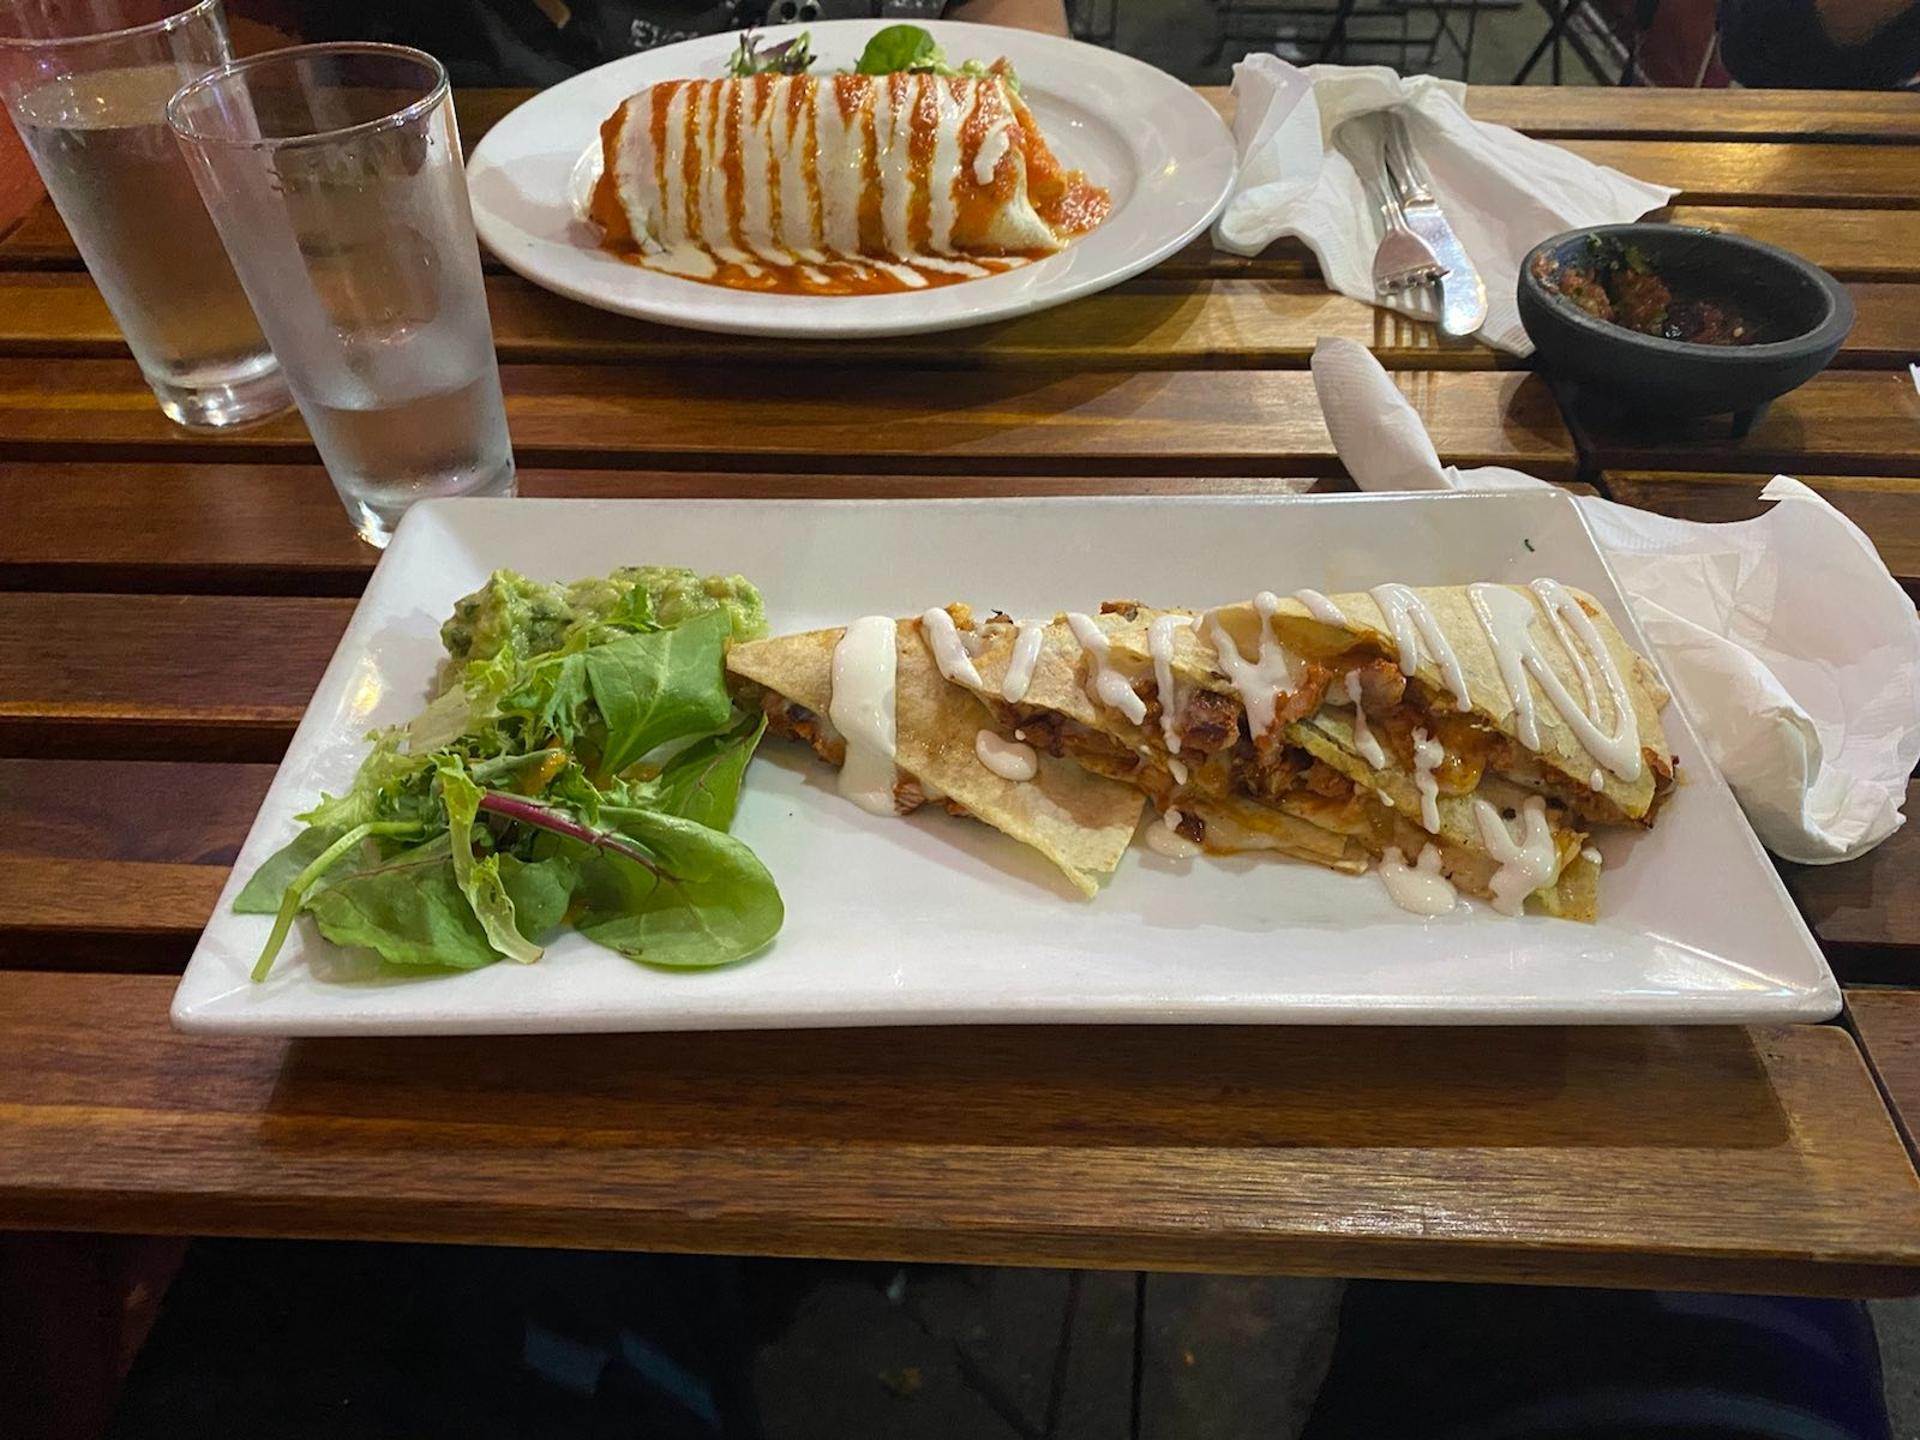 Image of some food from El Porton